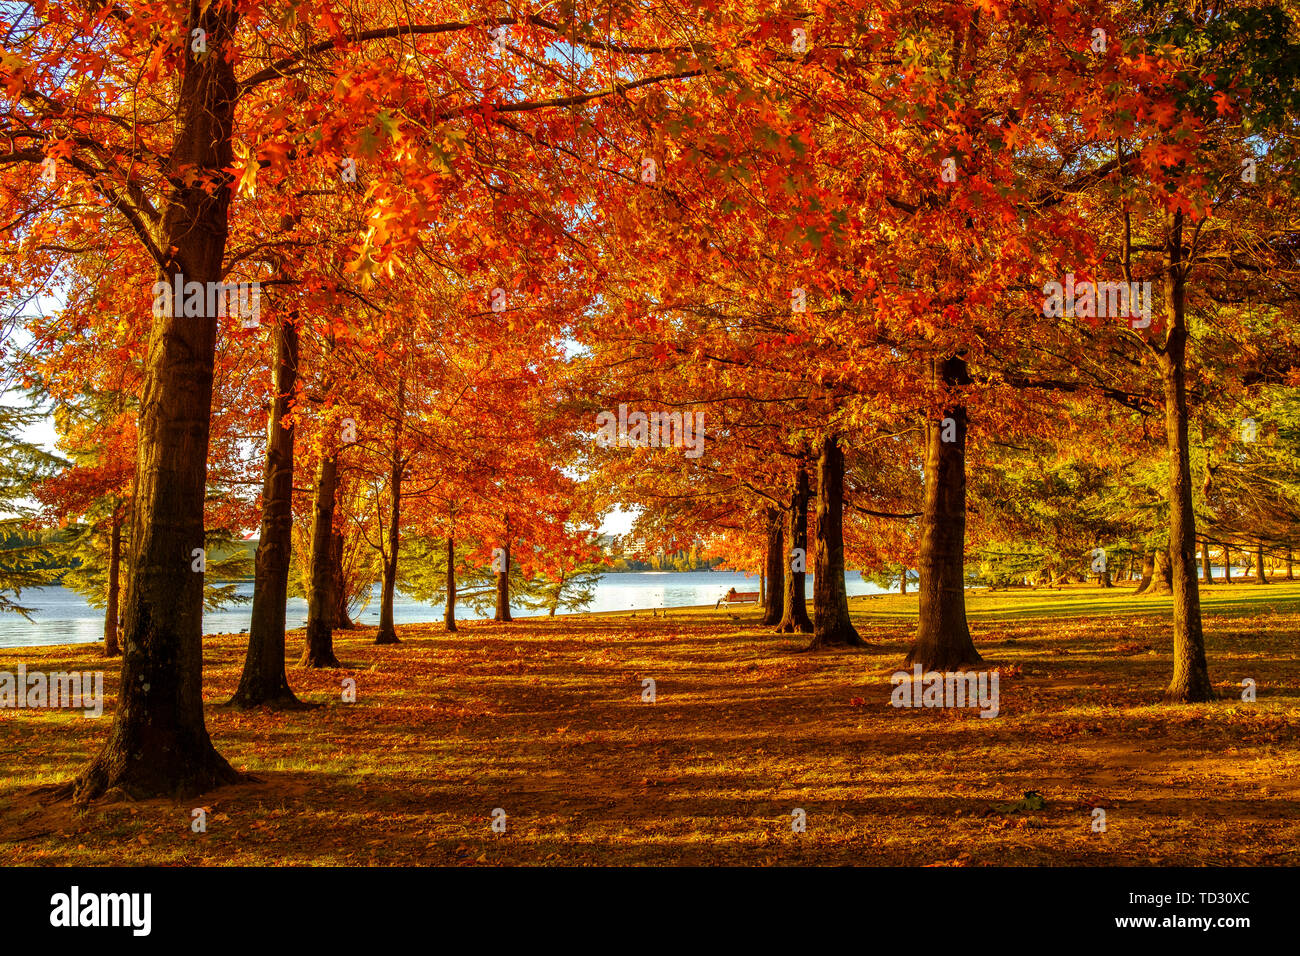 Bright red autumn leaves on a line of trees at Nara Peace Park Canberra ACT. Stock Photo